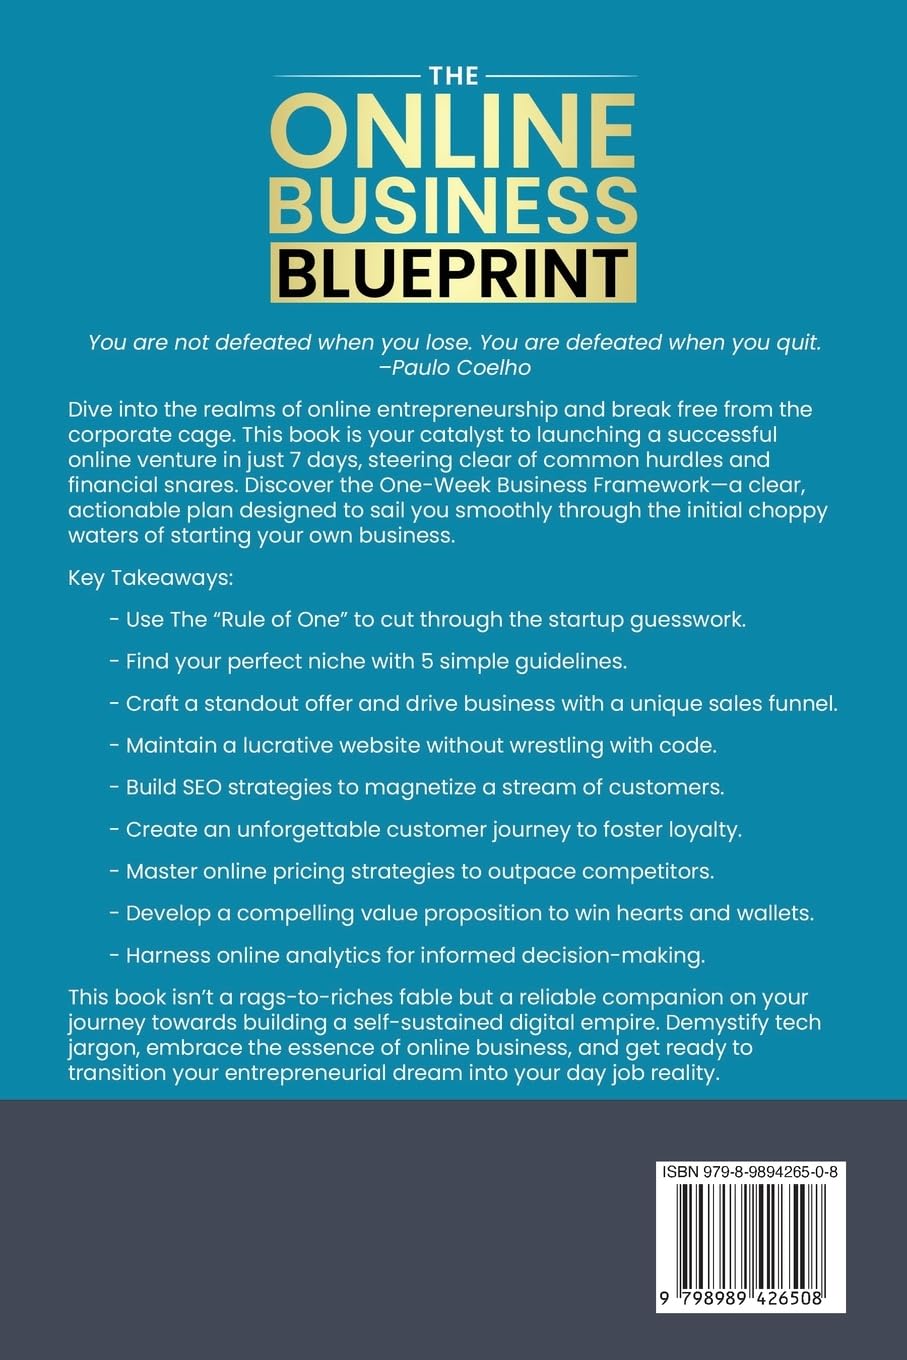 The Online Business Blueprint: A 7-Day Action Plan to Implement Proven E-Commerce and Digital Marketing Strategies, Break Free From the Corporate Cage, and Start Earning Passive Income Now